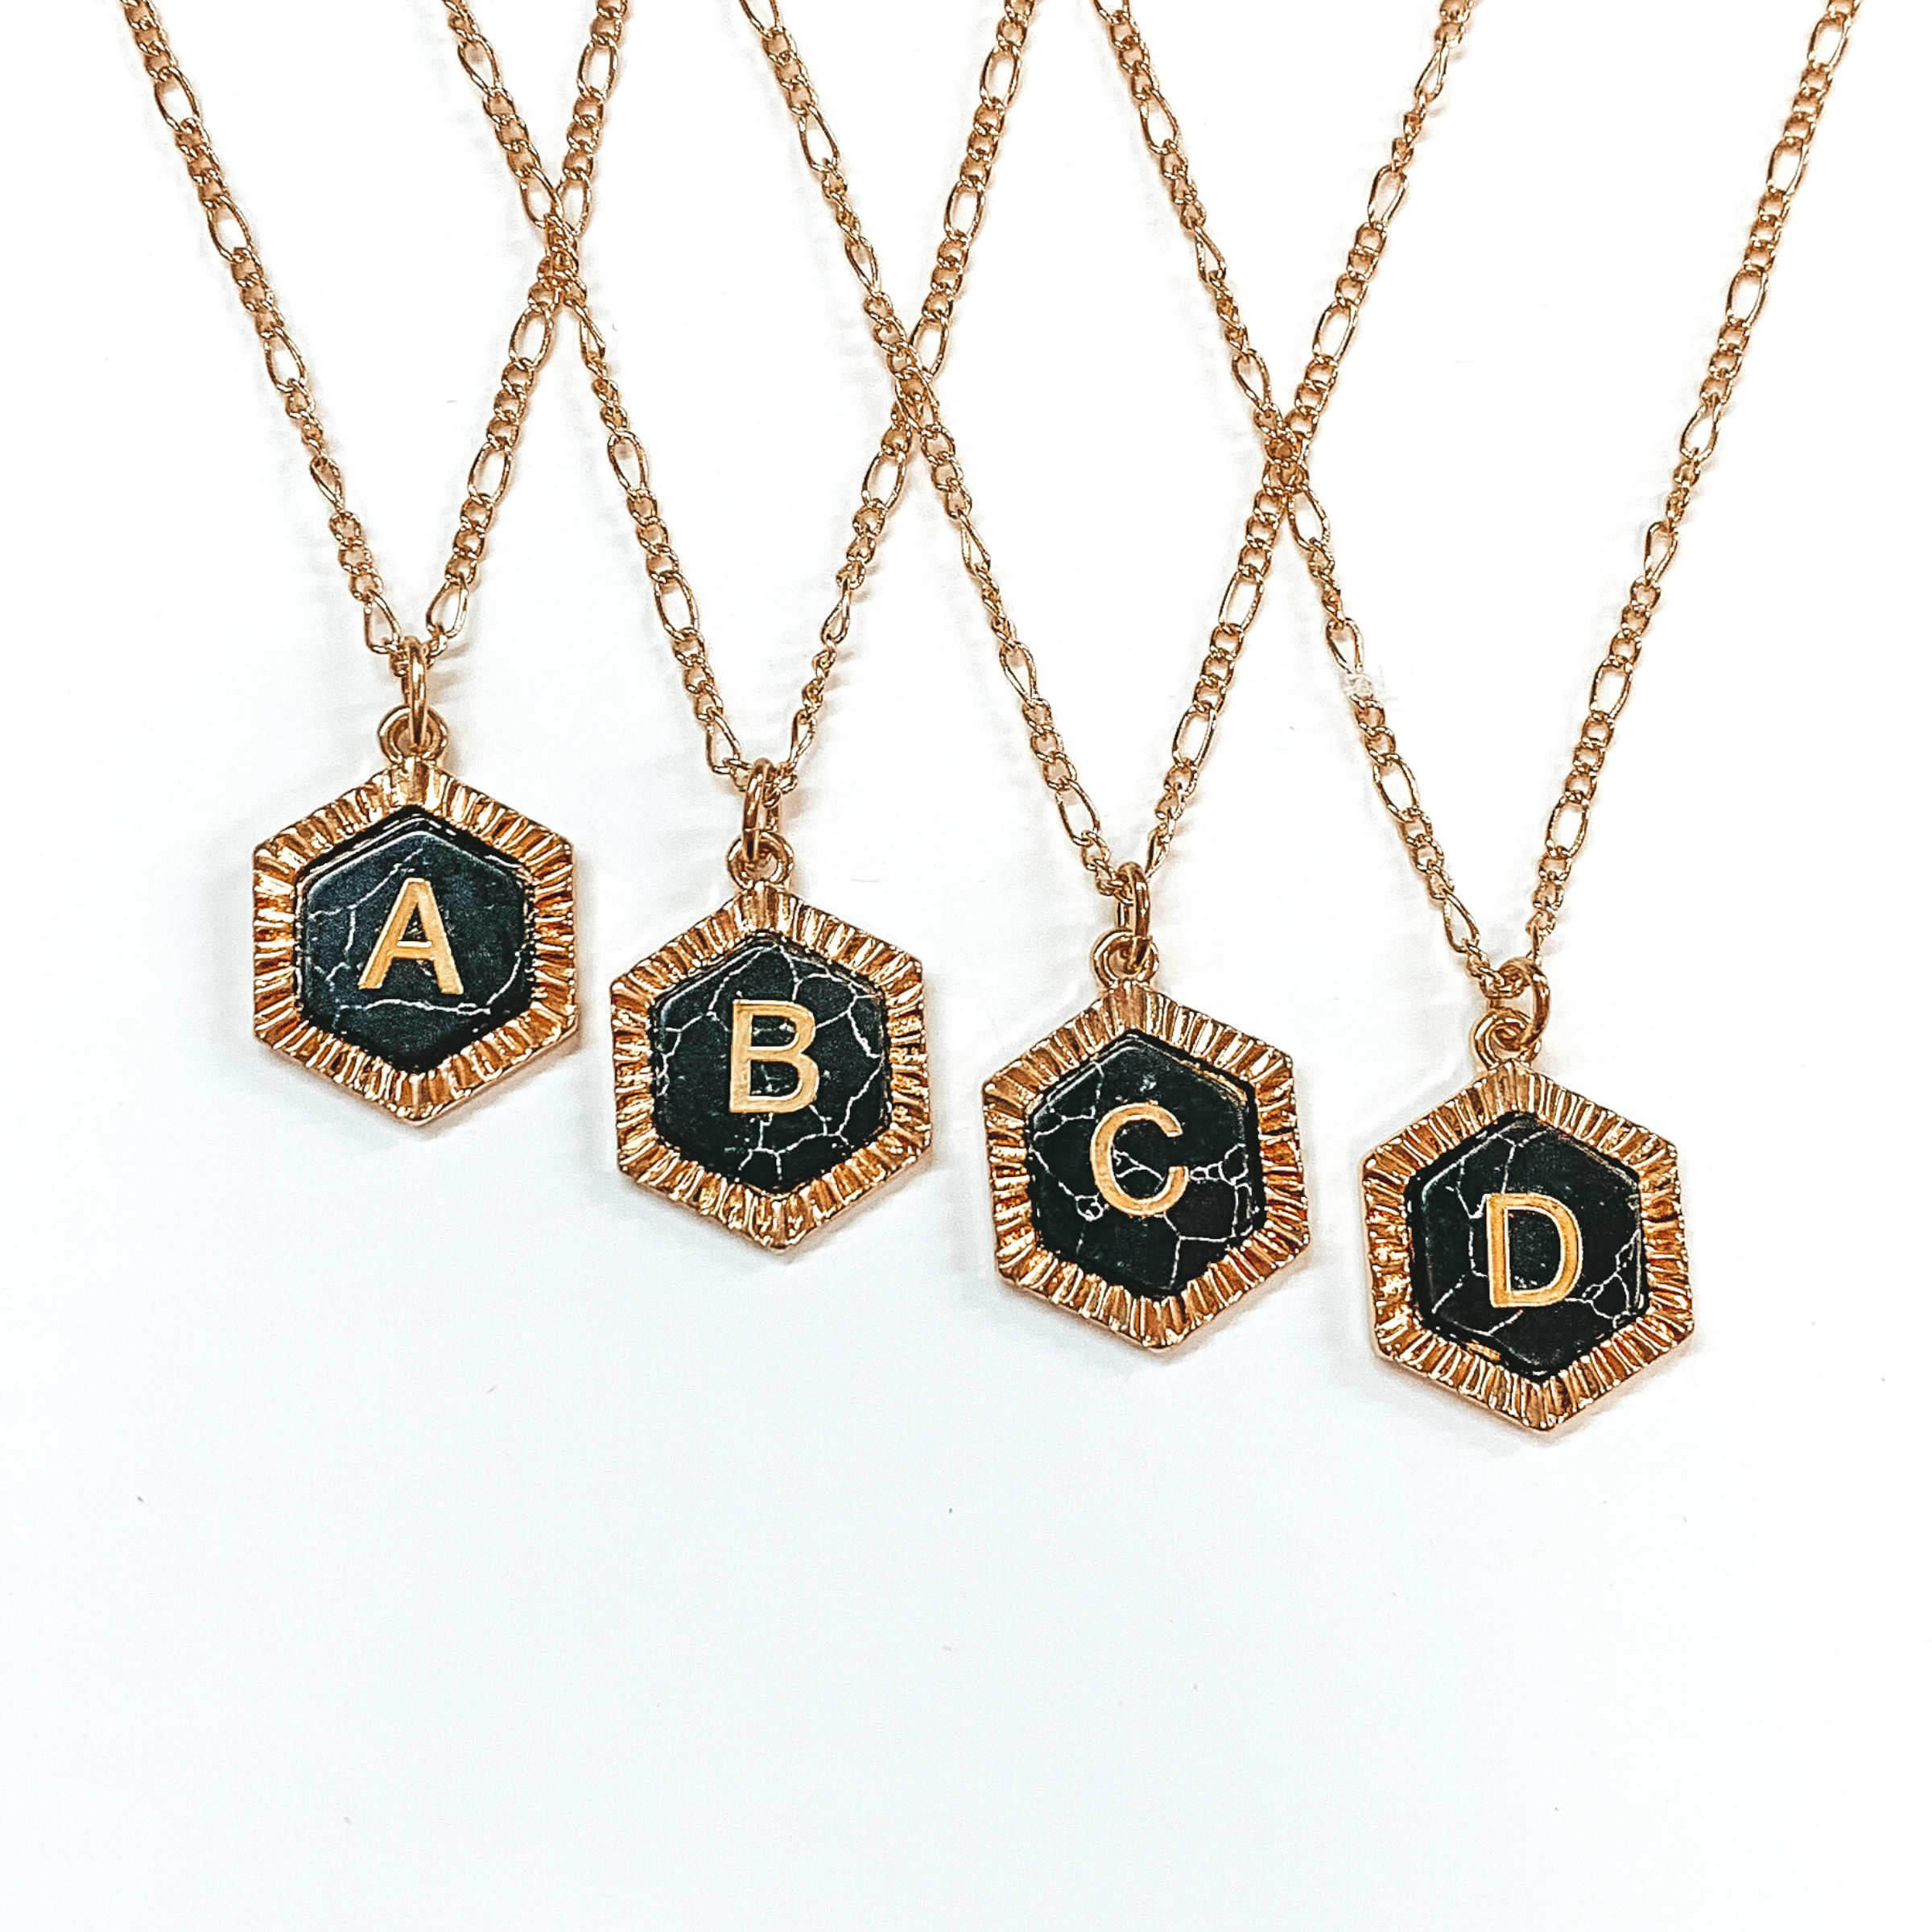 Four gold, figaro chained necklaces with hexagon pendants. Each pendant is outlined with gold and has a black stone center with a gold initial. This picture includes the initials "A, B, C, and D." These necklaces are pictured on a white background.